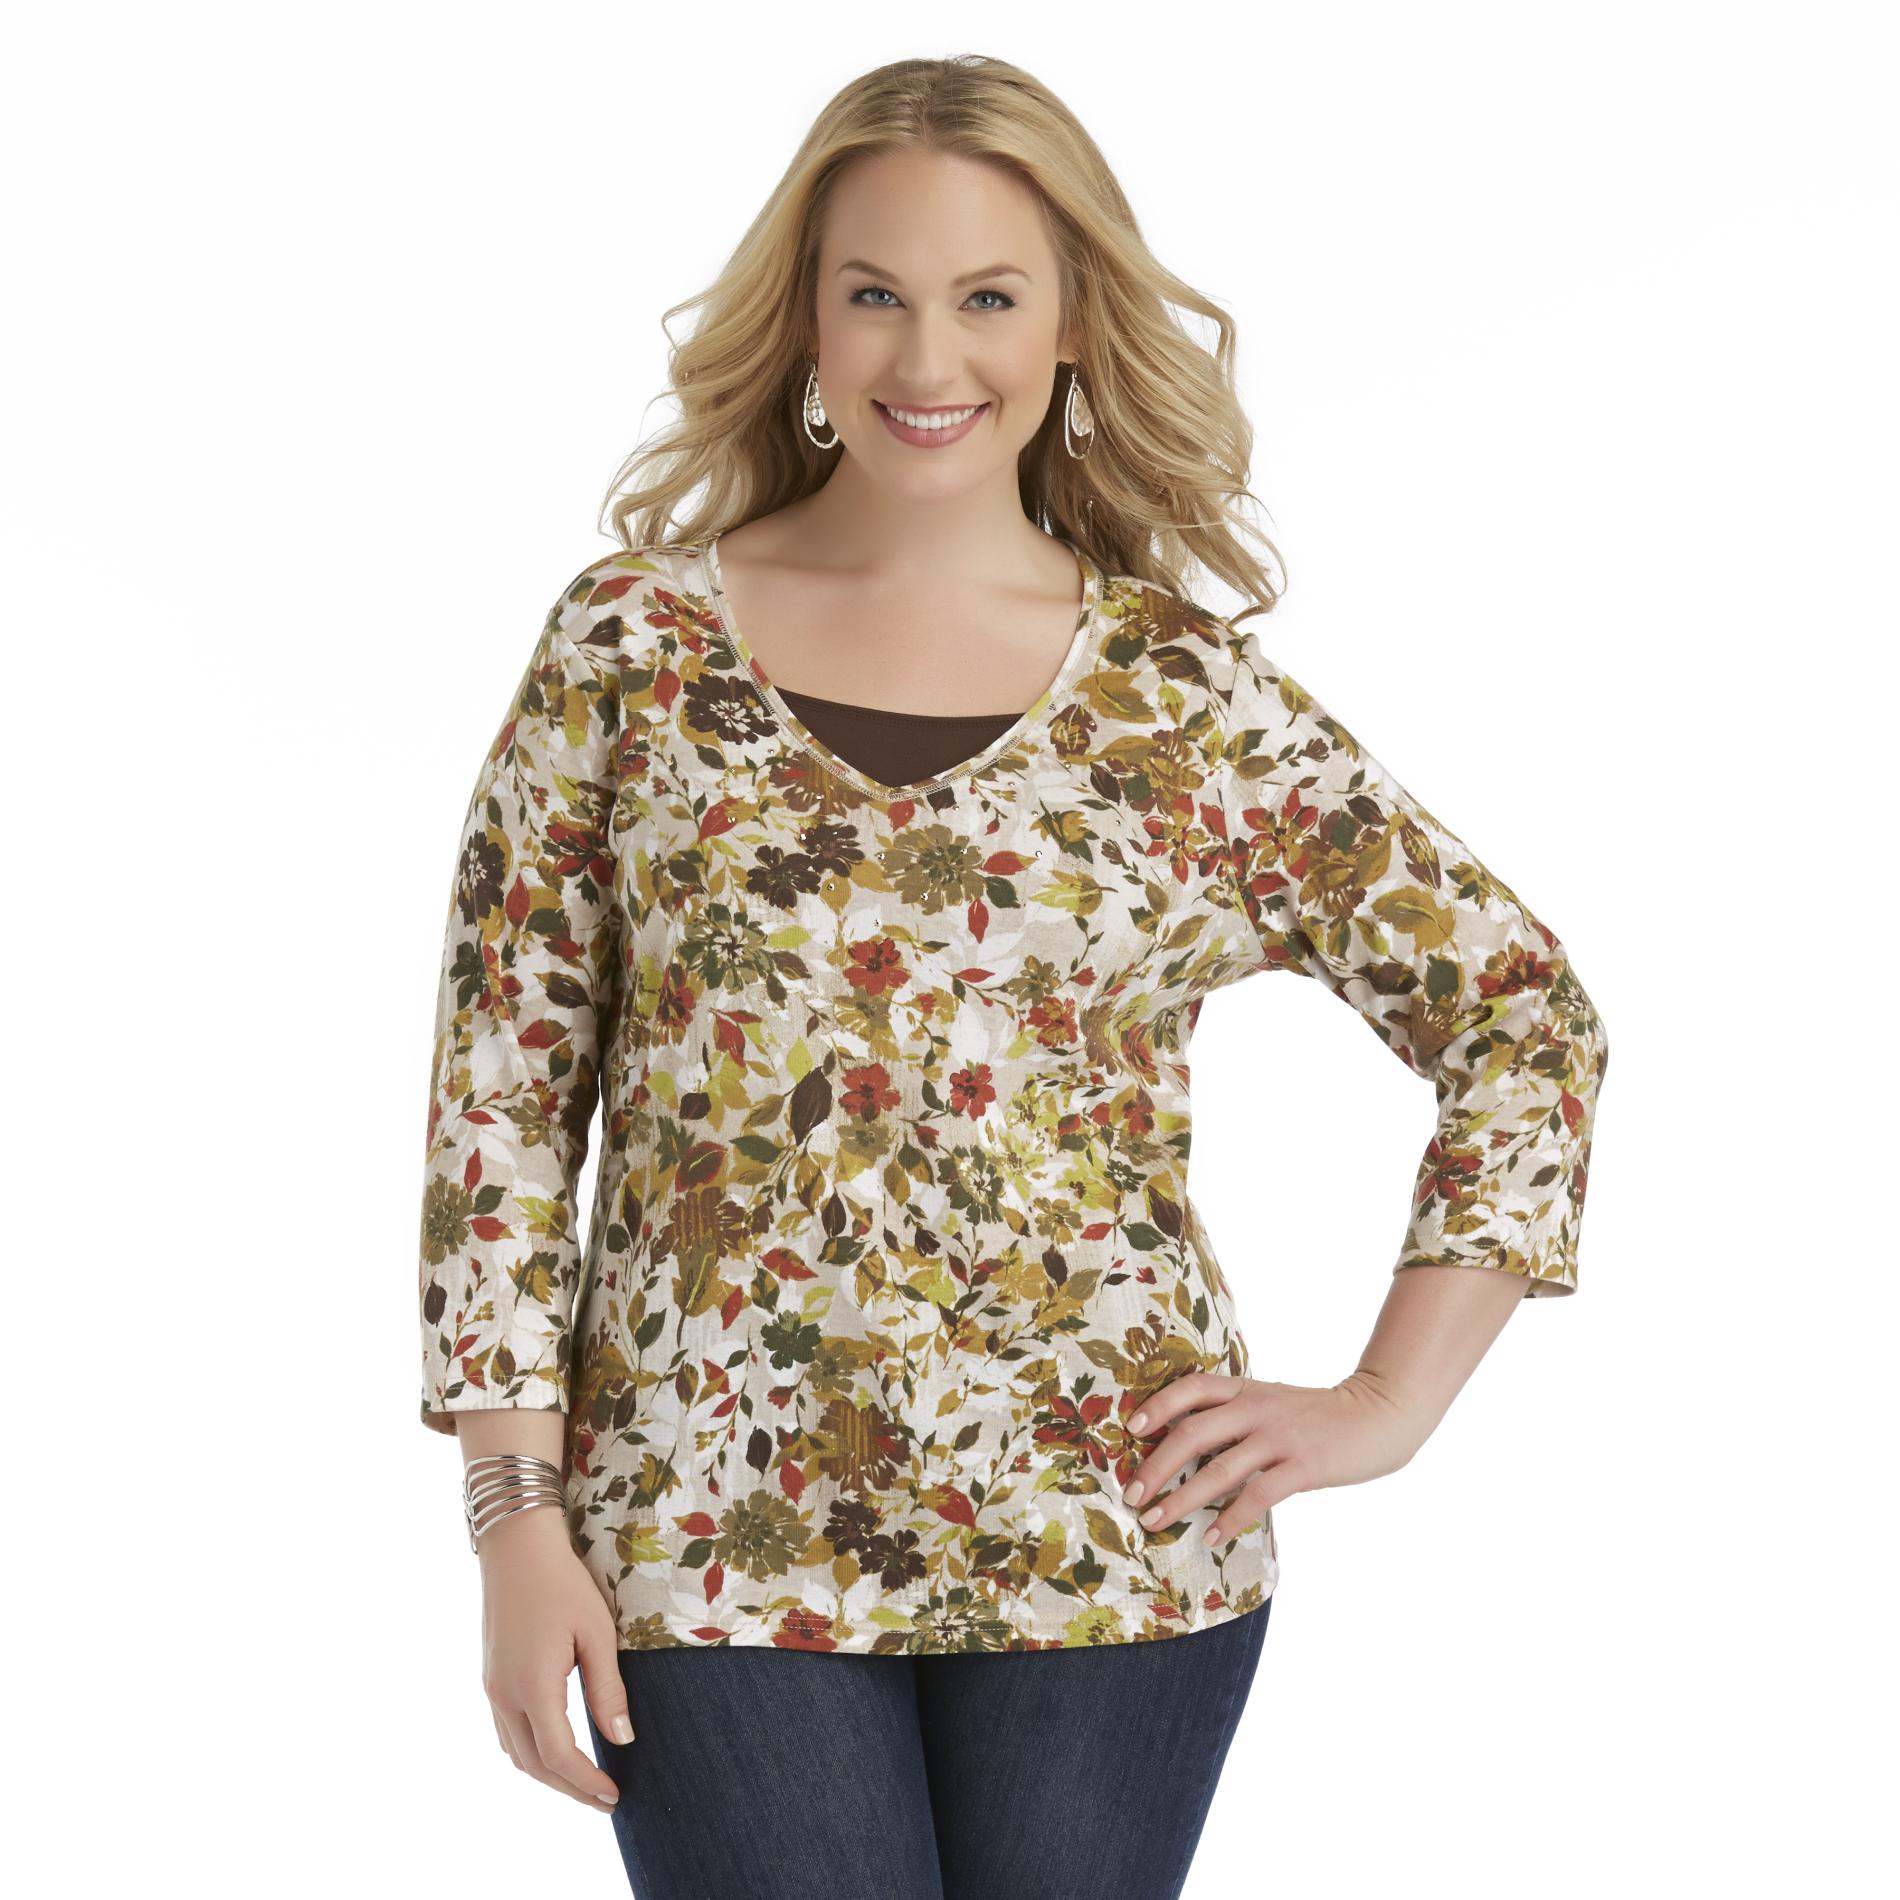 Basic Editions Women's Plus Printed Knit Top - Floral